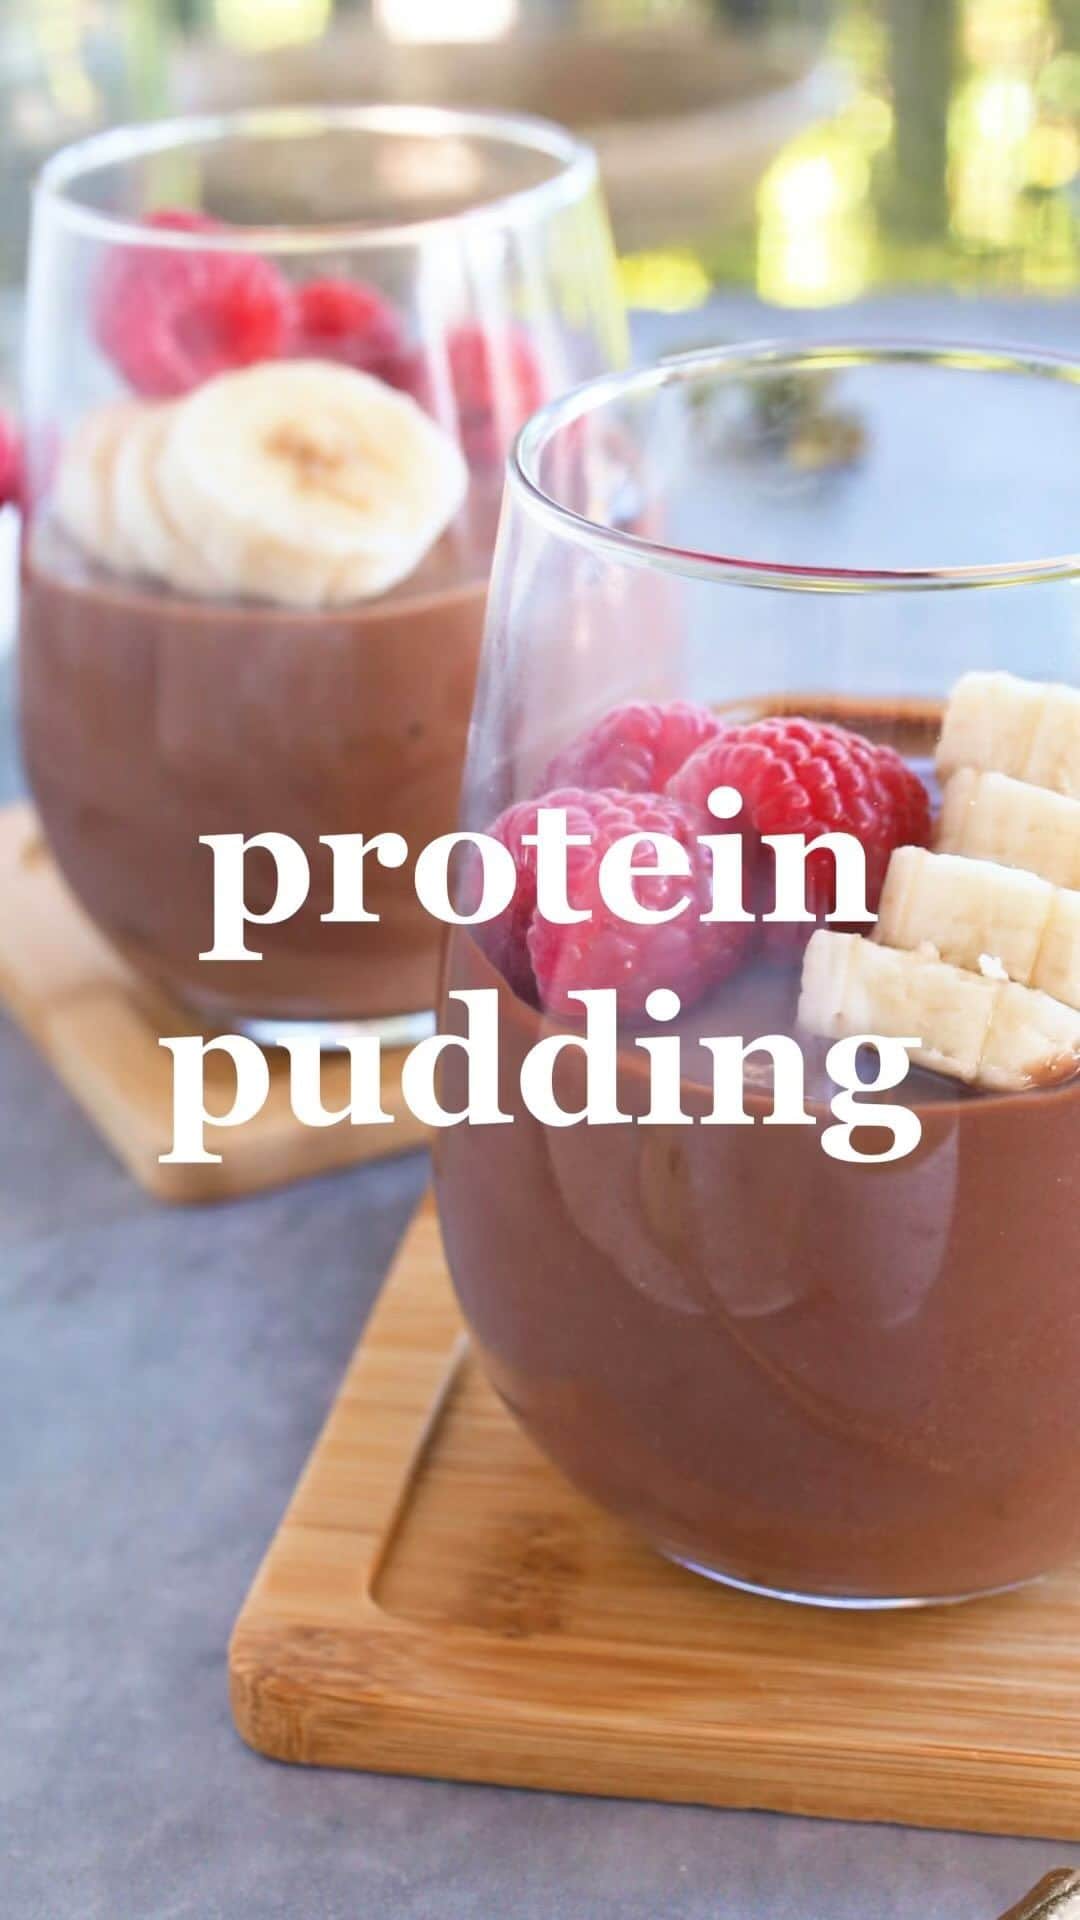 Amanda Biskのインスタグラム：「PROTEIN PUDDING 💪🏼 36g of plant based protein per serve! Powered by @pureplantprotein 💥 this packs a punch!   This recipe is now live on the #freshbodyfitmind app 🩵 Designed by our recipe queen @annielonglife 👸🏼  REMINDER: You can win free @pureplantprotein goodies this month by taking part in my Athletic August challenge! Share the challenge here on Insta for your chance to win 🙌🏼 #plantbased #vegan #proteinrecipes   ab♥️x  www.freshbodyfitmind.com」